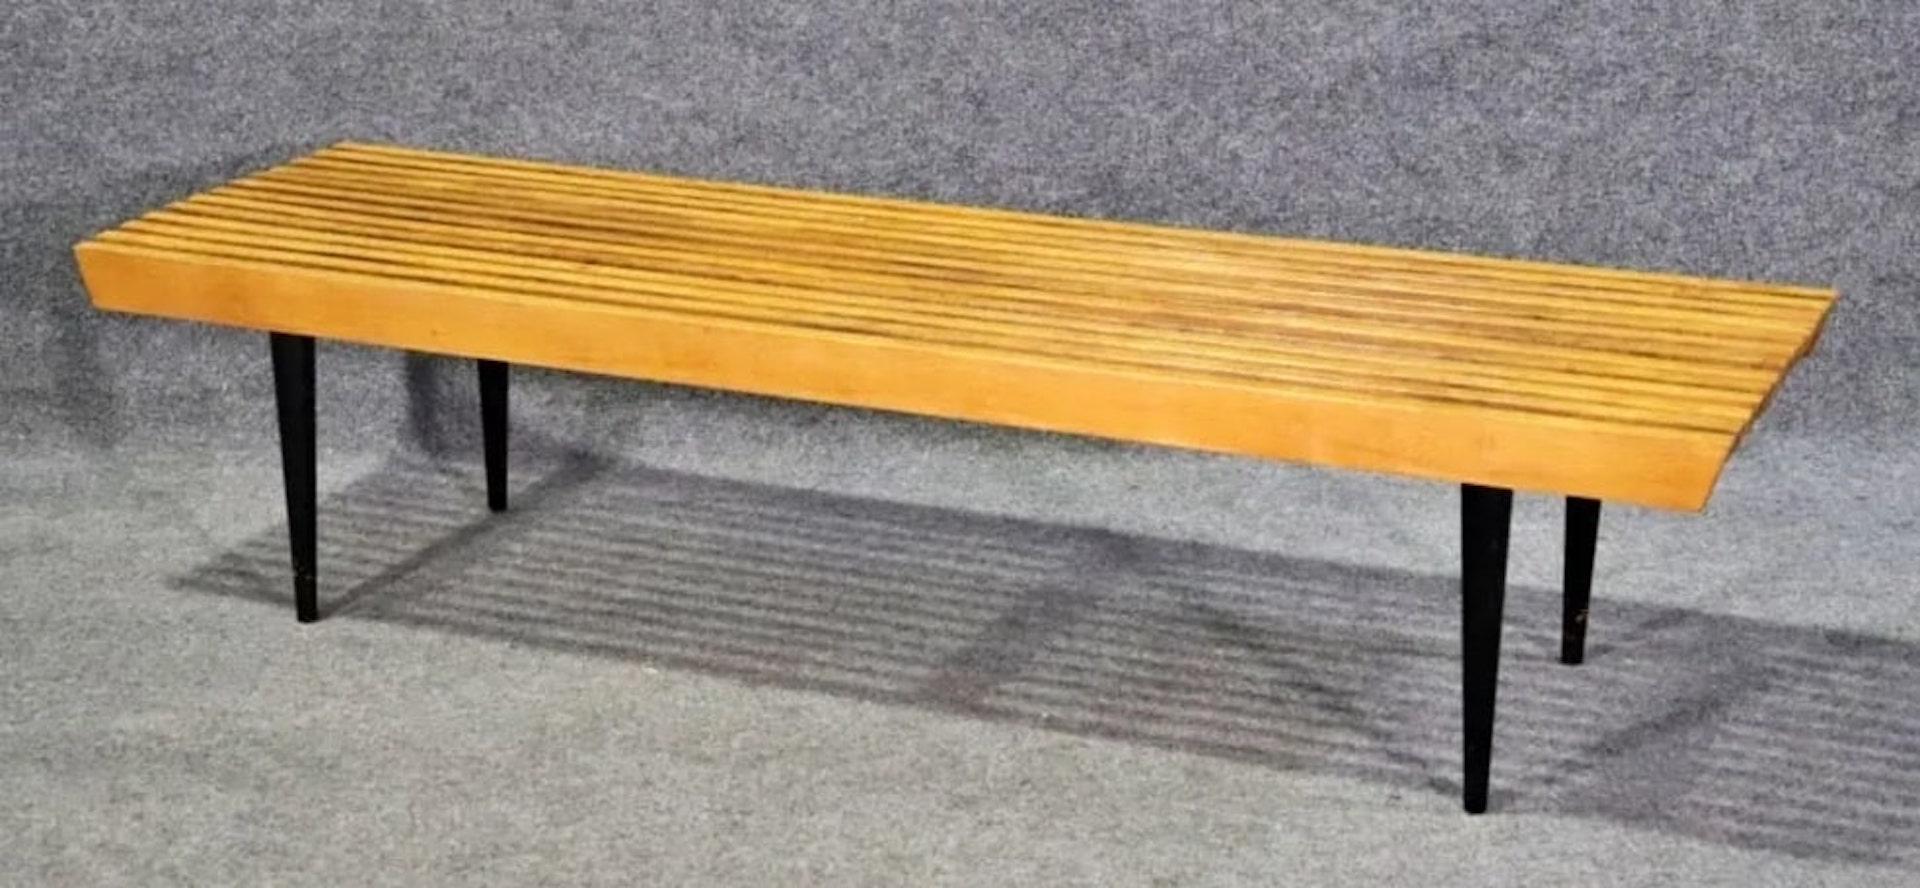 Mid-century modern slat bench in the style of Herman Miller. Blonde top on black tapered legs.
Please confirm location NY or NJ